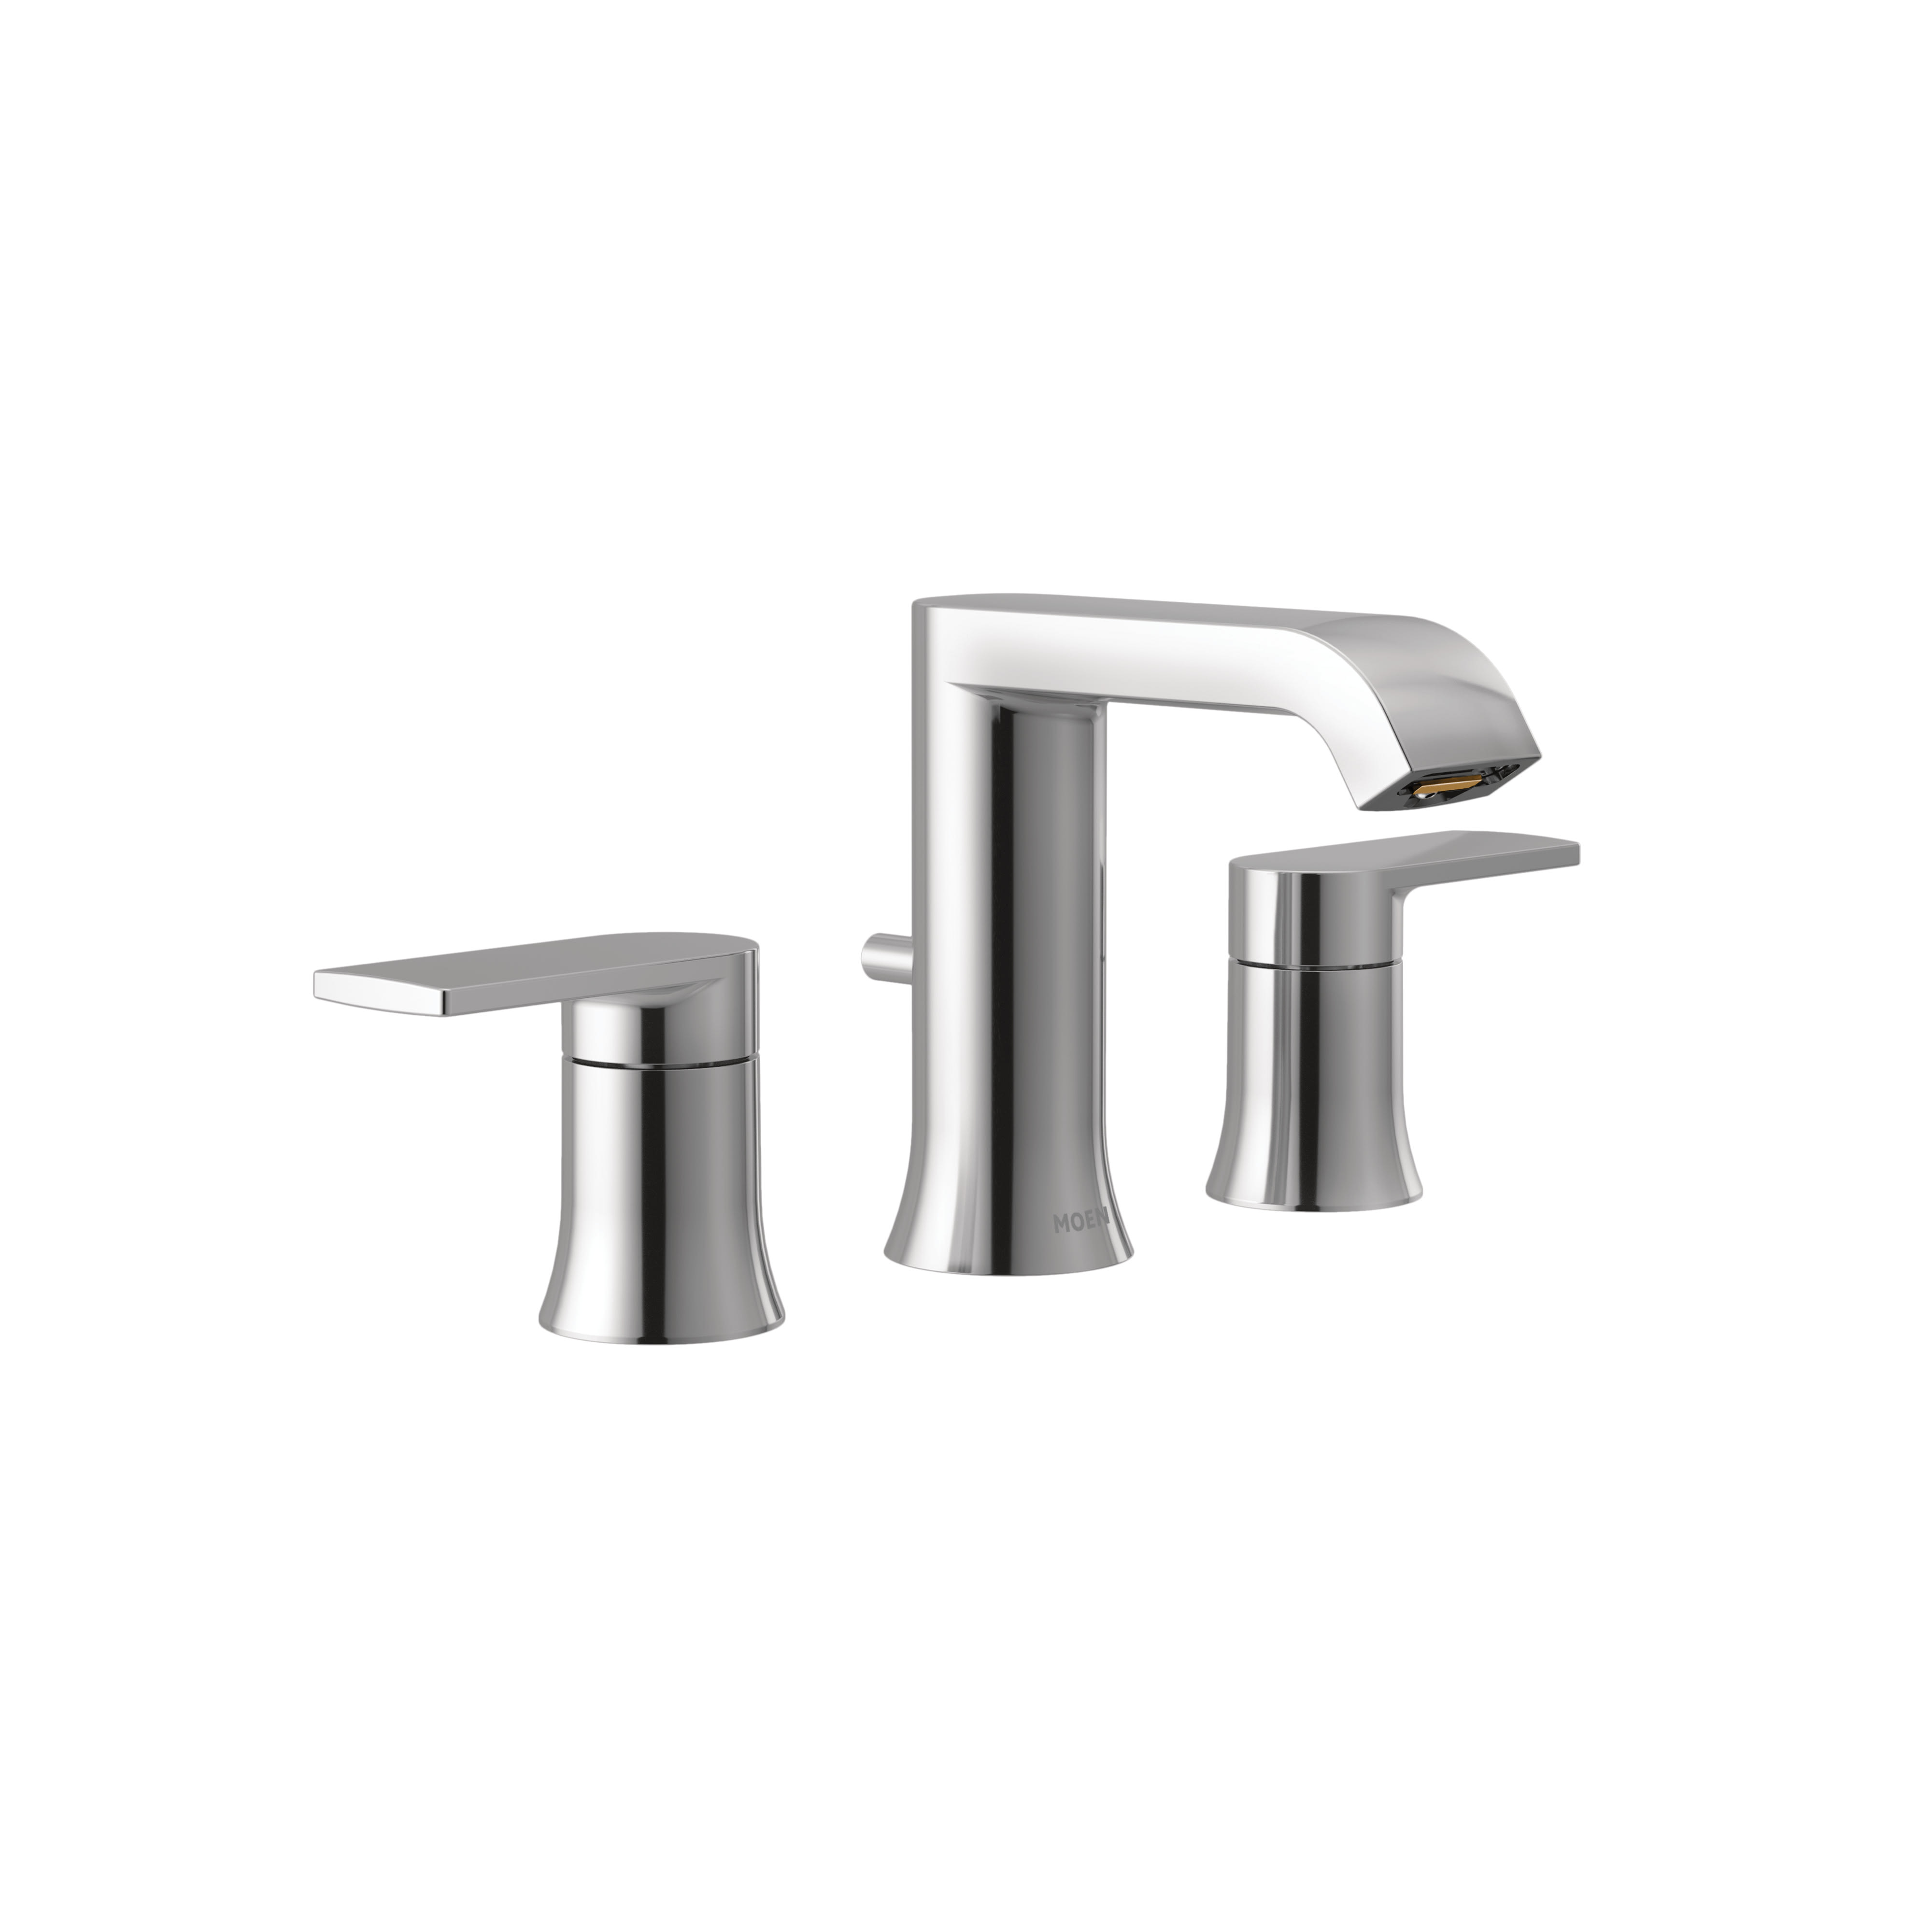 Moen T6708 Chrome Genta 1 2 Gpm Widespread Bathroom Faucet With